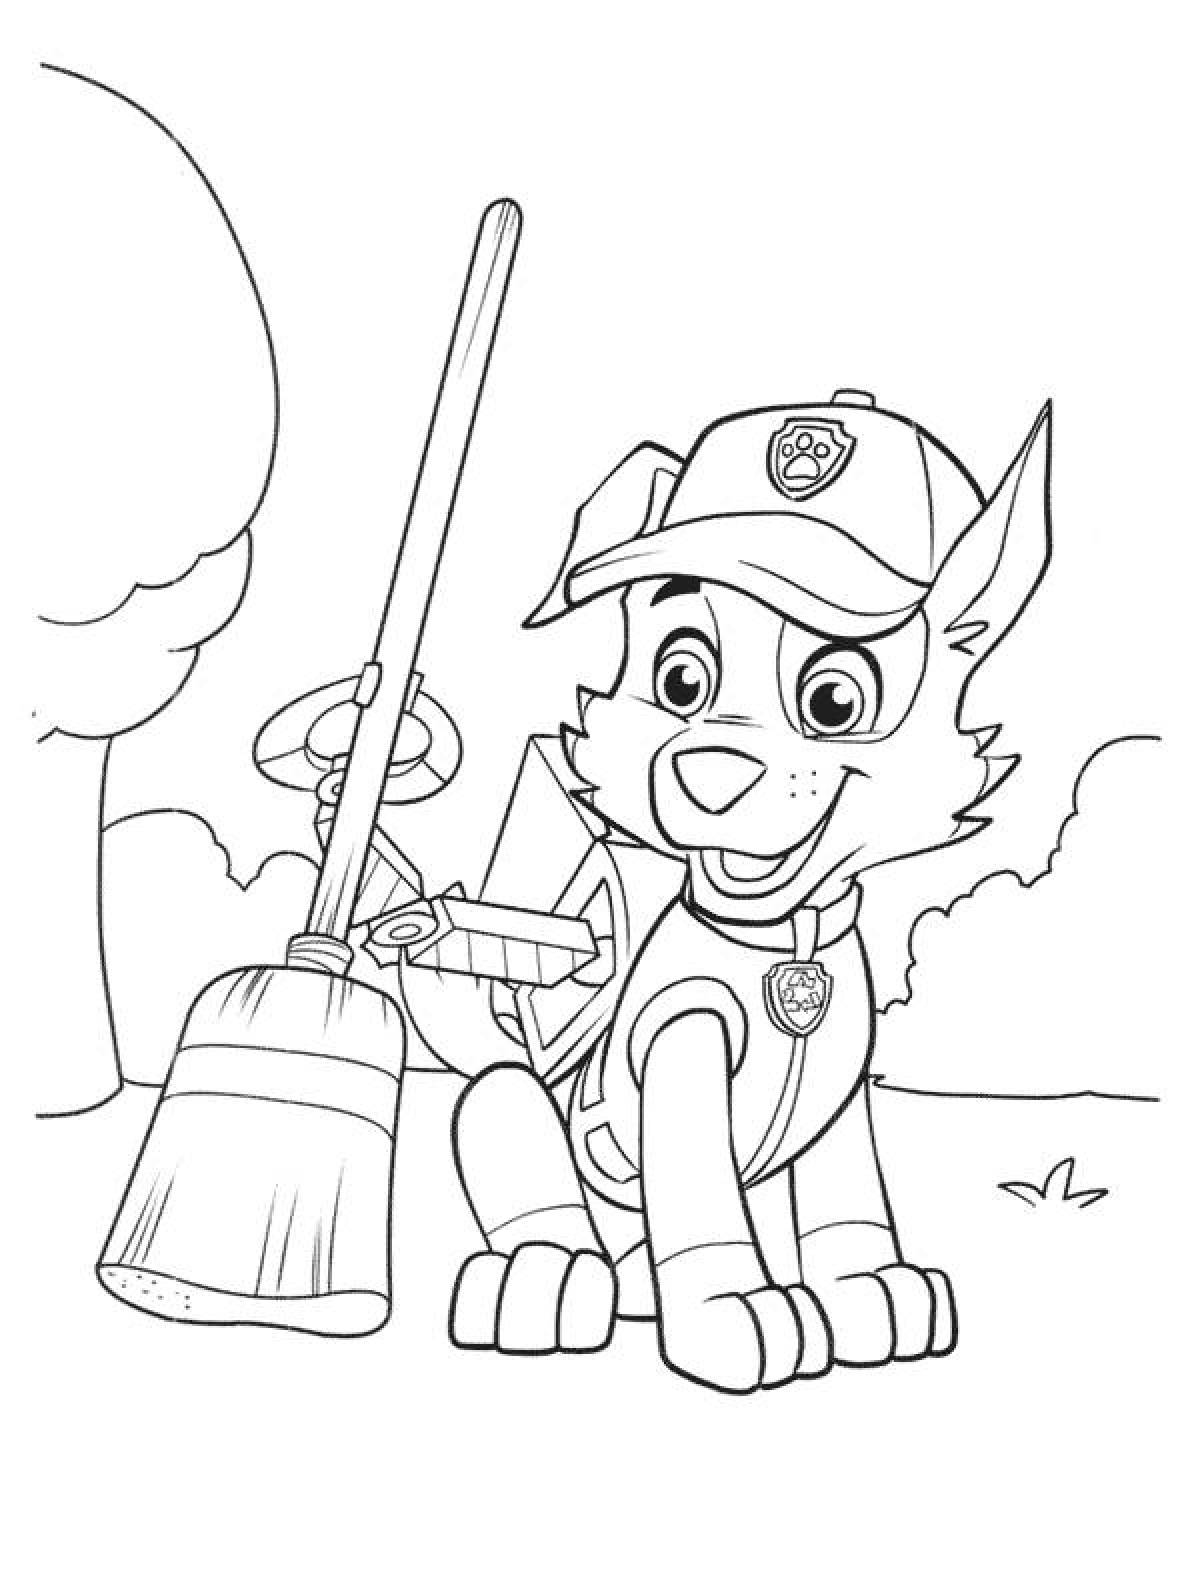 Marshal with a broom